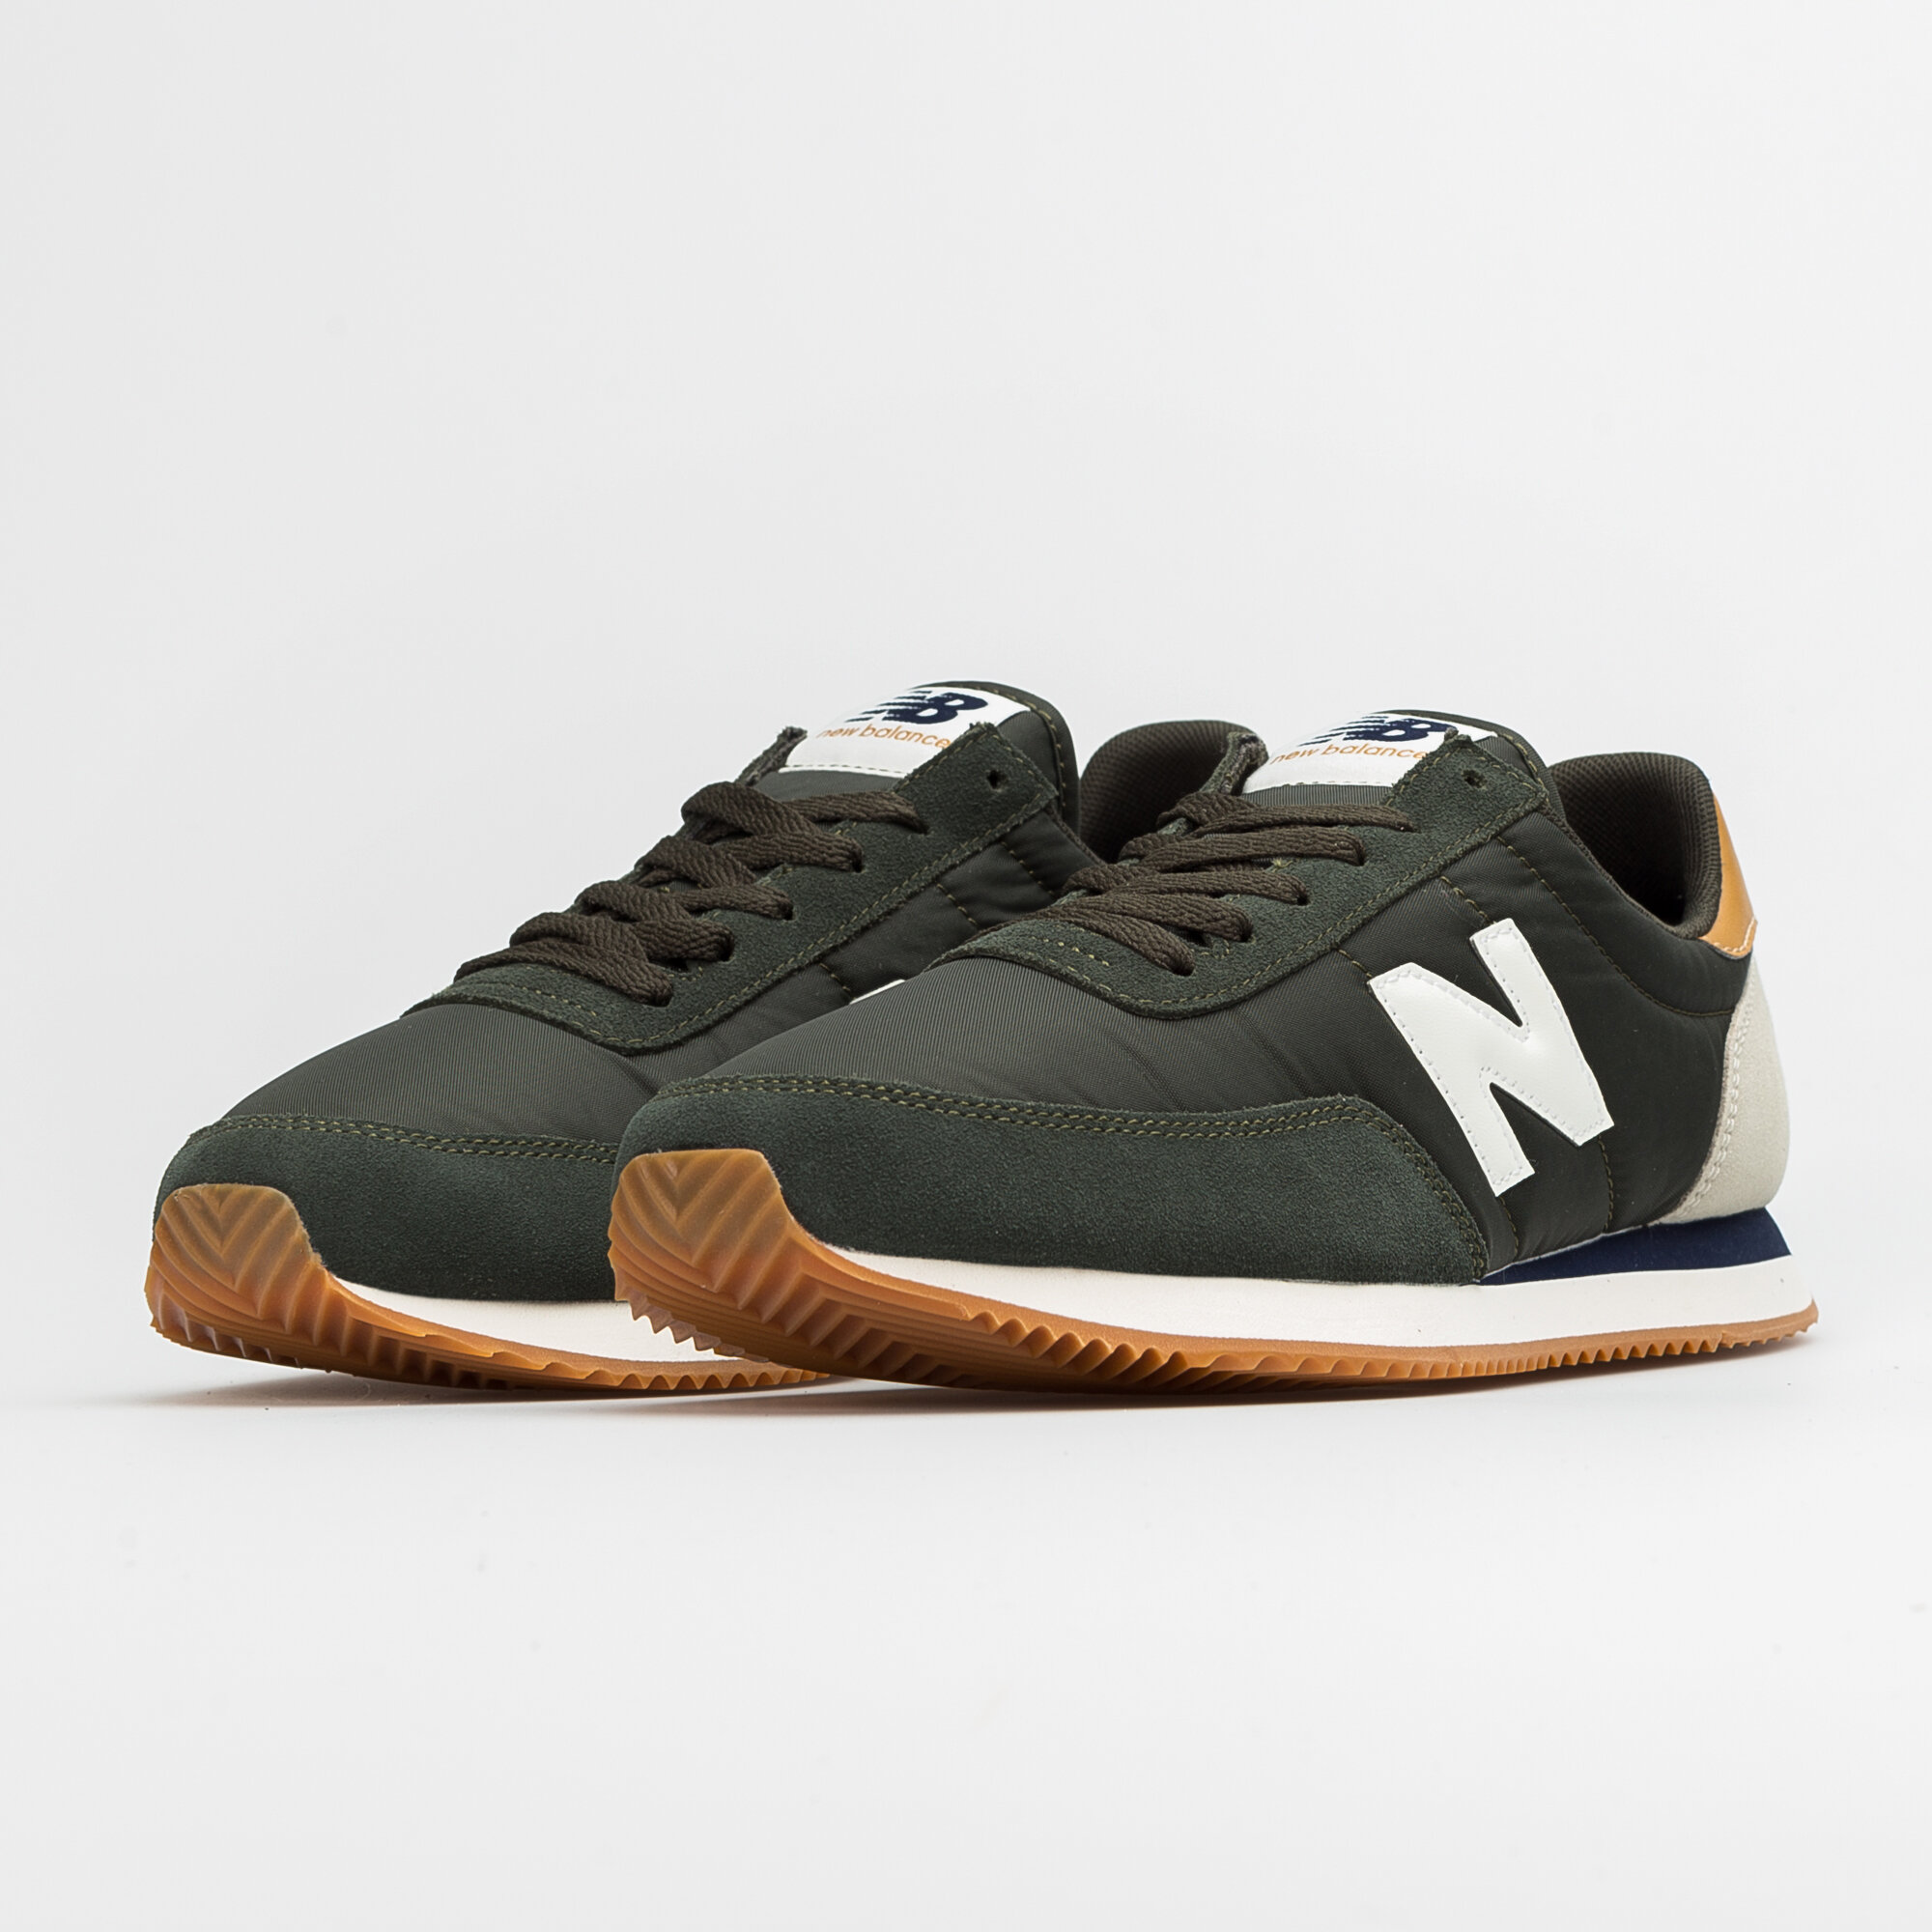 New Balance UL 720 UD — SNEAKERS SPECIALIST